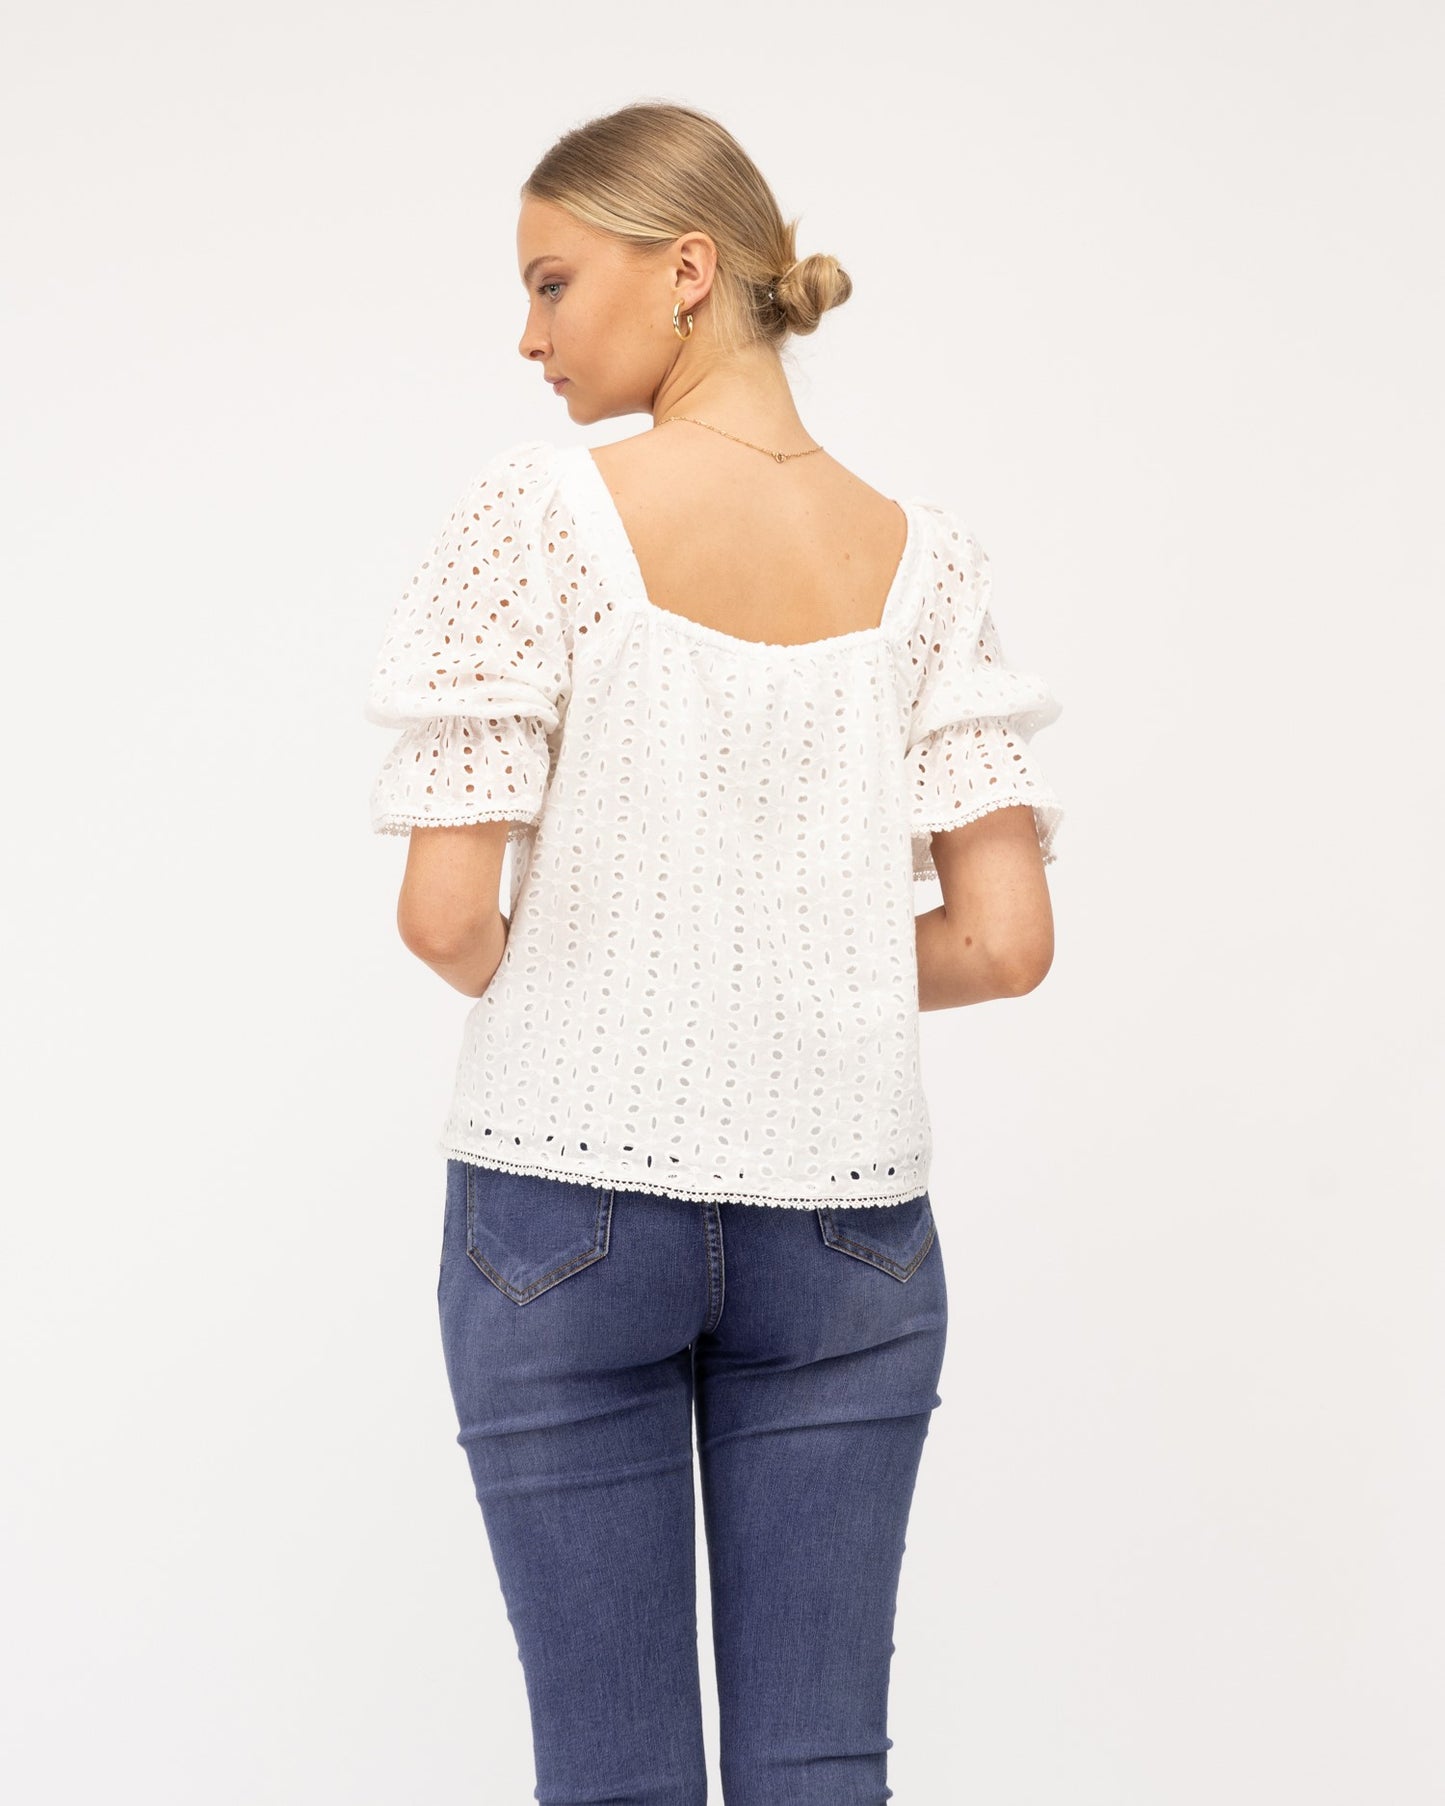 Label of Love - Broderie Anglaise Cotton  Top - LOL10354 - Cream -50% Off